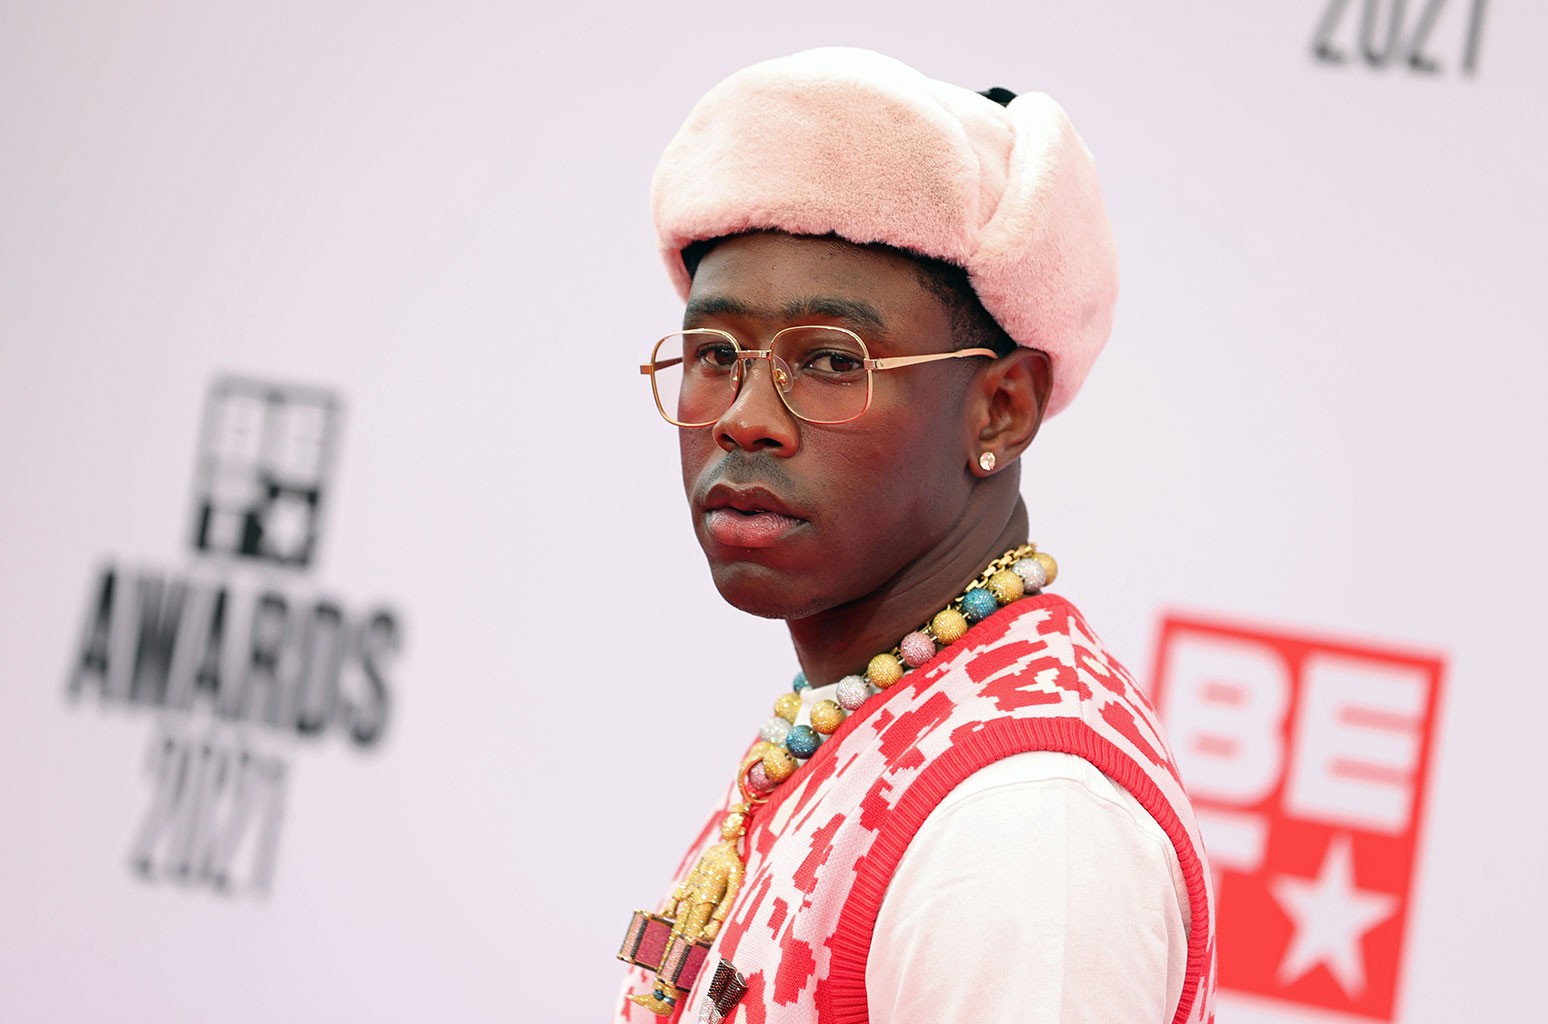 Tyler, The Creator Updates on Instagram: Tyler poses for a